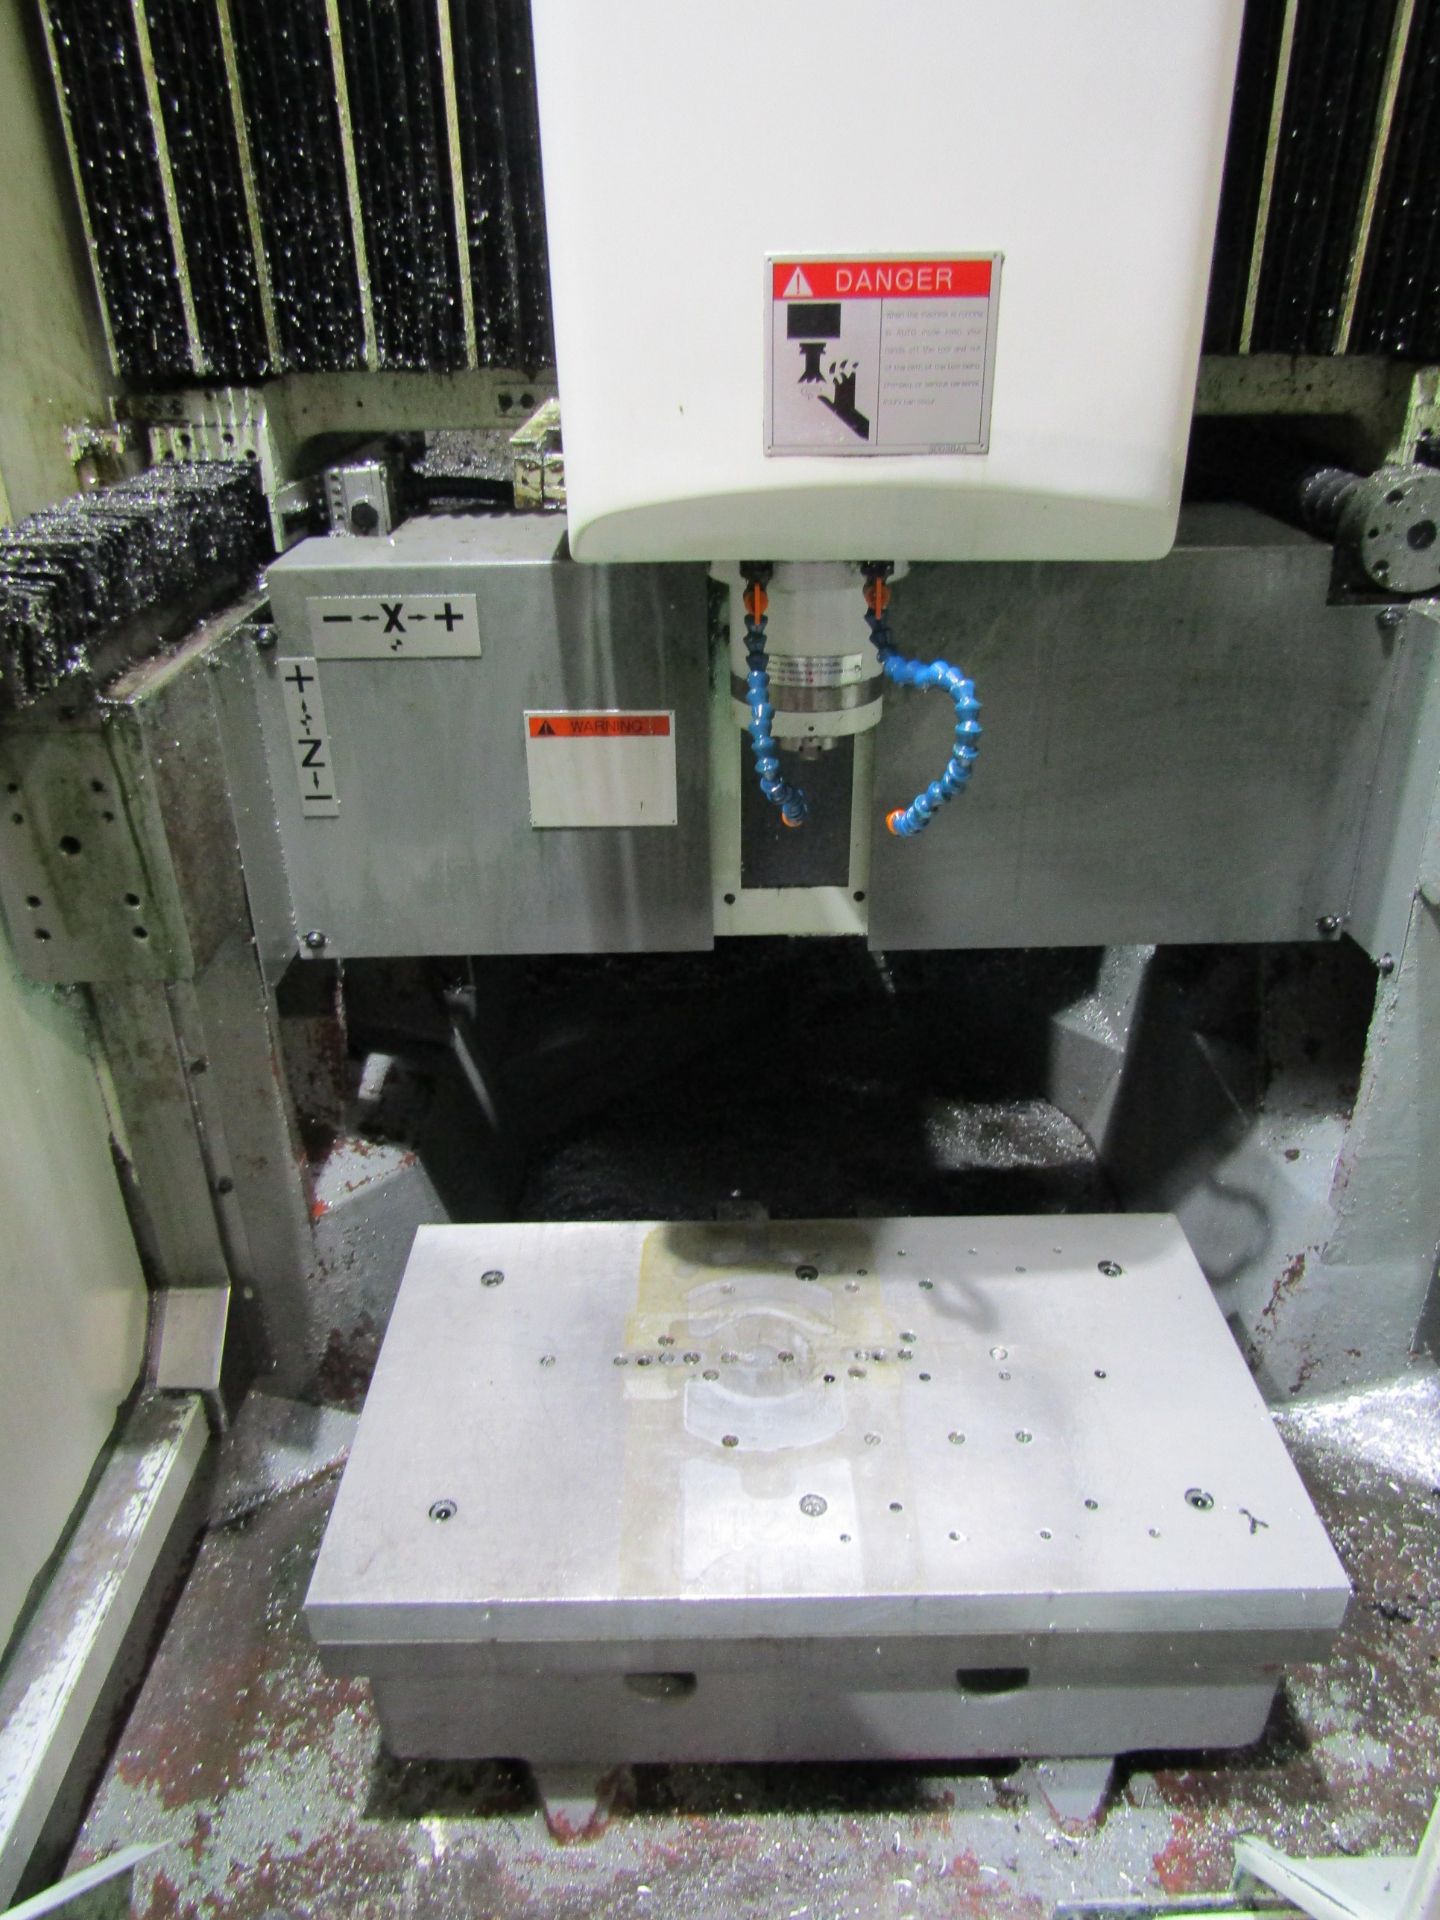 ENSHU CNC MILL VERTICAL MACHINING CENTER, MODEL S300, SERIAL 1041, MANUFACTURED 1996, ENAC SYSTEM - Image 2 of 8